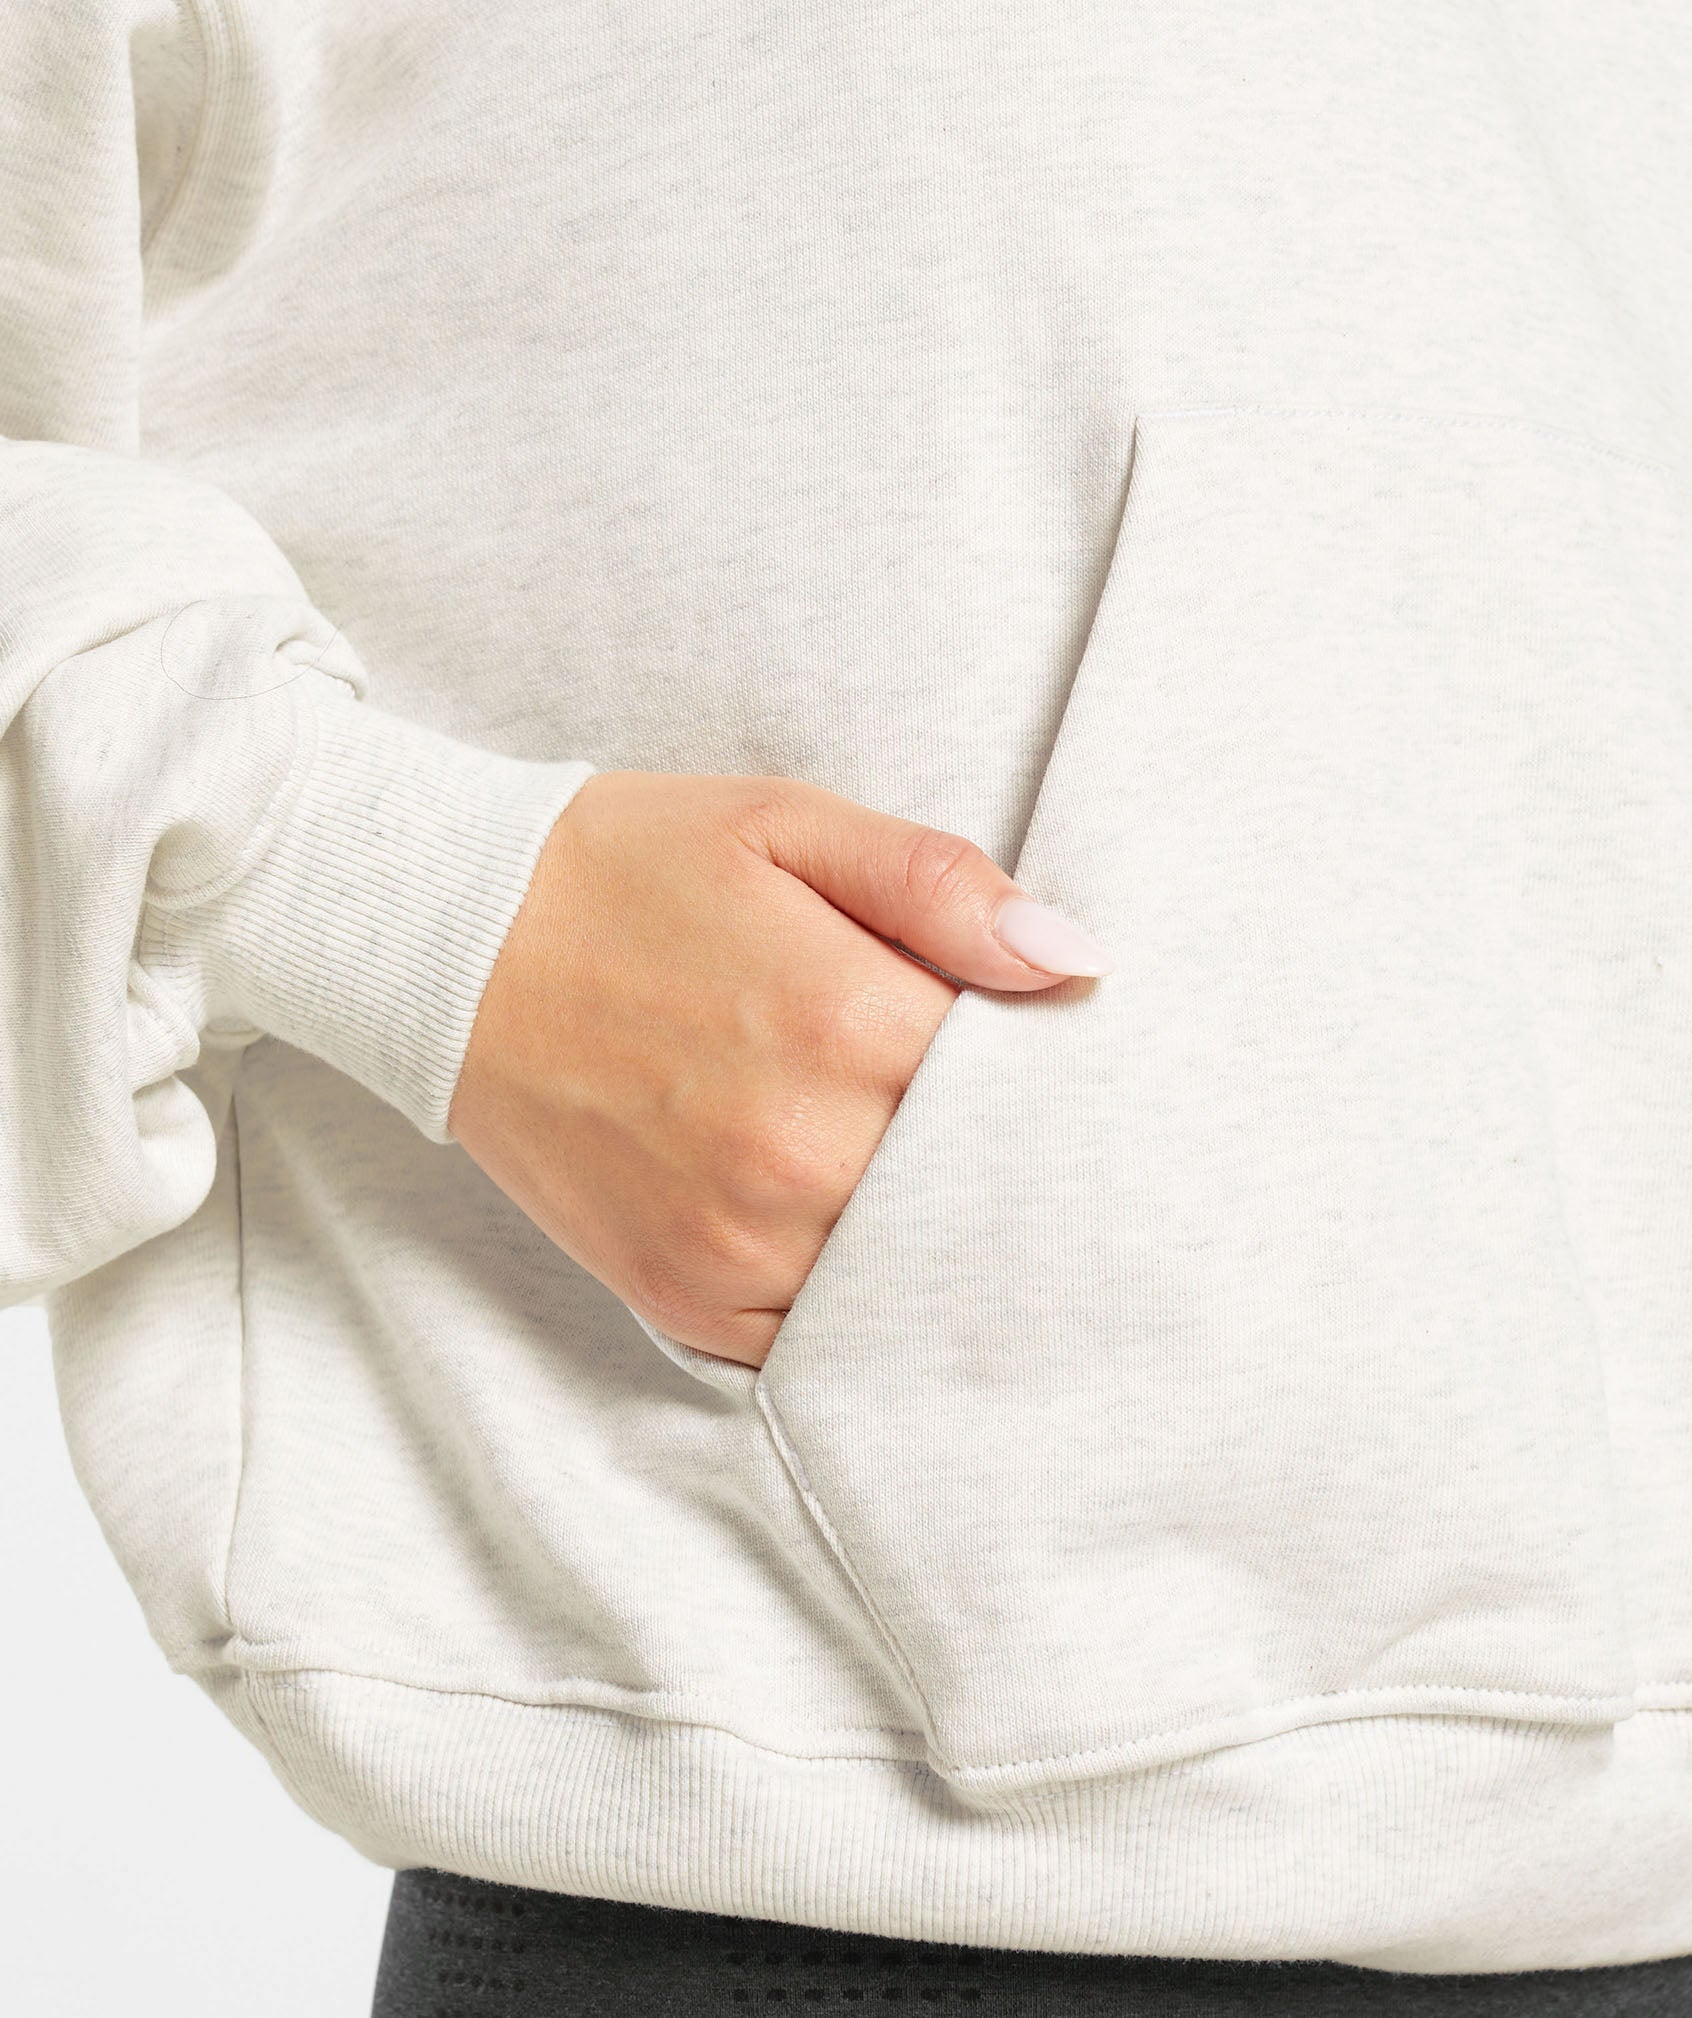 Rest Day Sweats 1/2 Zip Pullover in White Marl - view 6